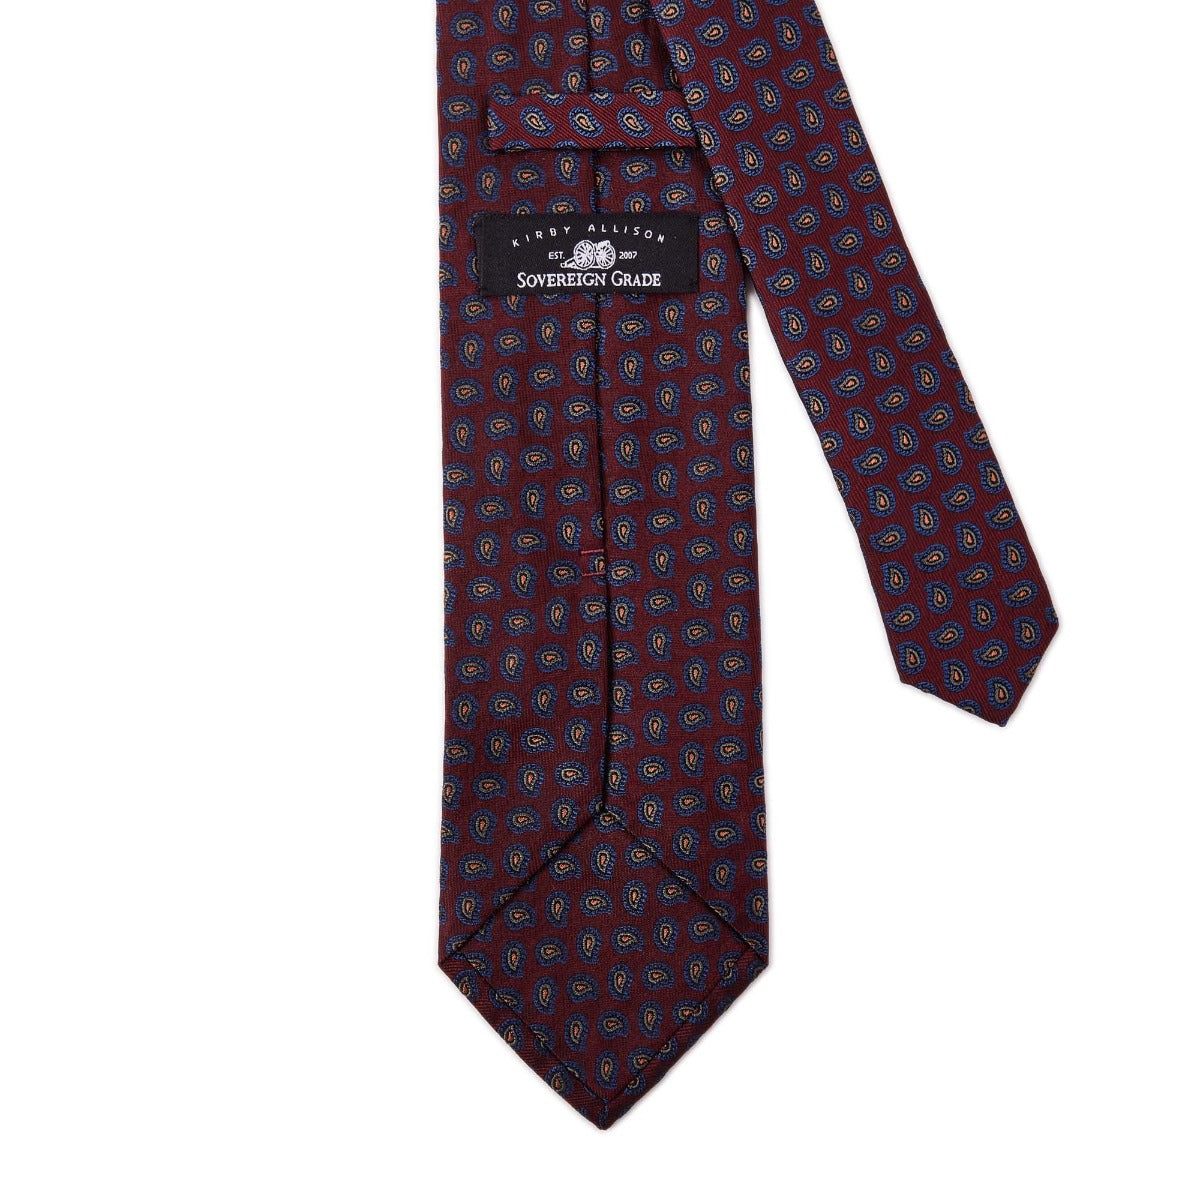 A high-quality handmade Sovereign Grade Burgundy Paisley Jacquard Silk Tie with blue and red polka dots, made in the United Kingdom by KirbyAllison.com.